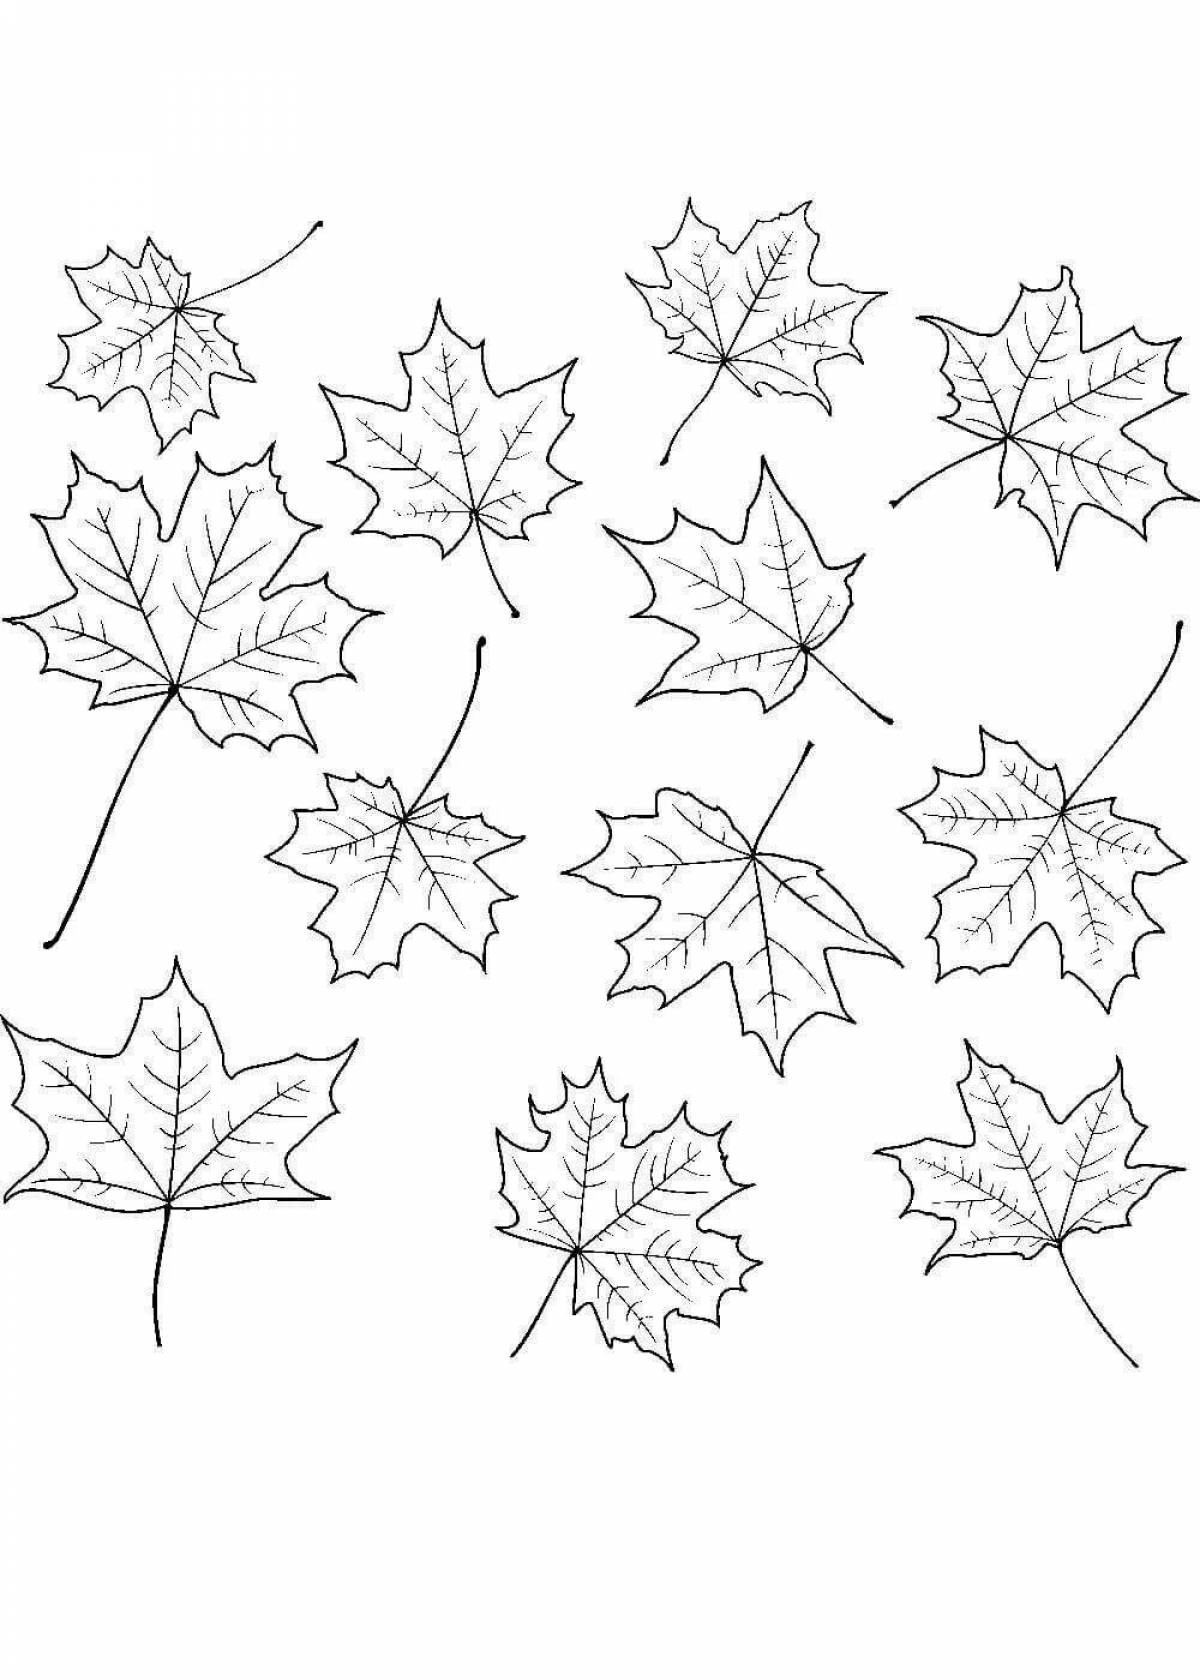 Coloring many leaves